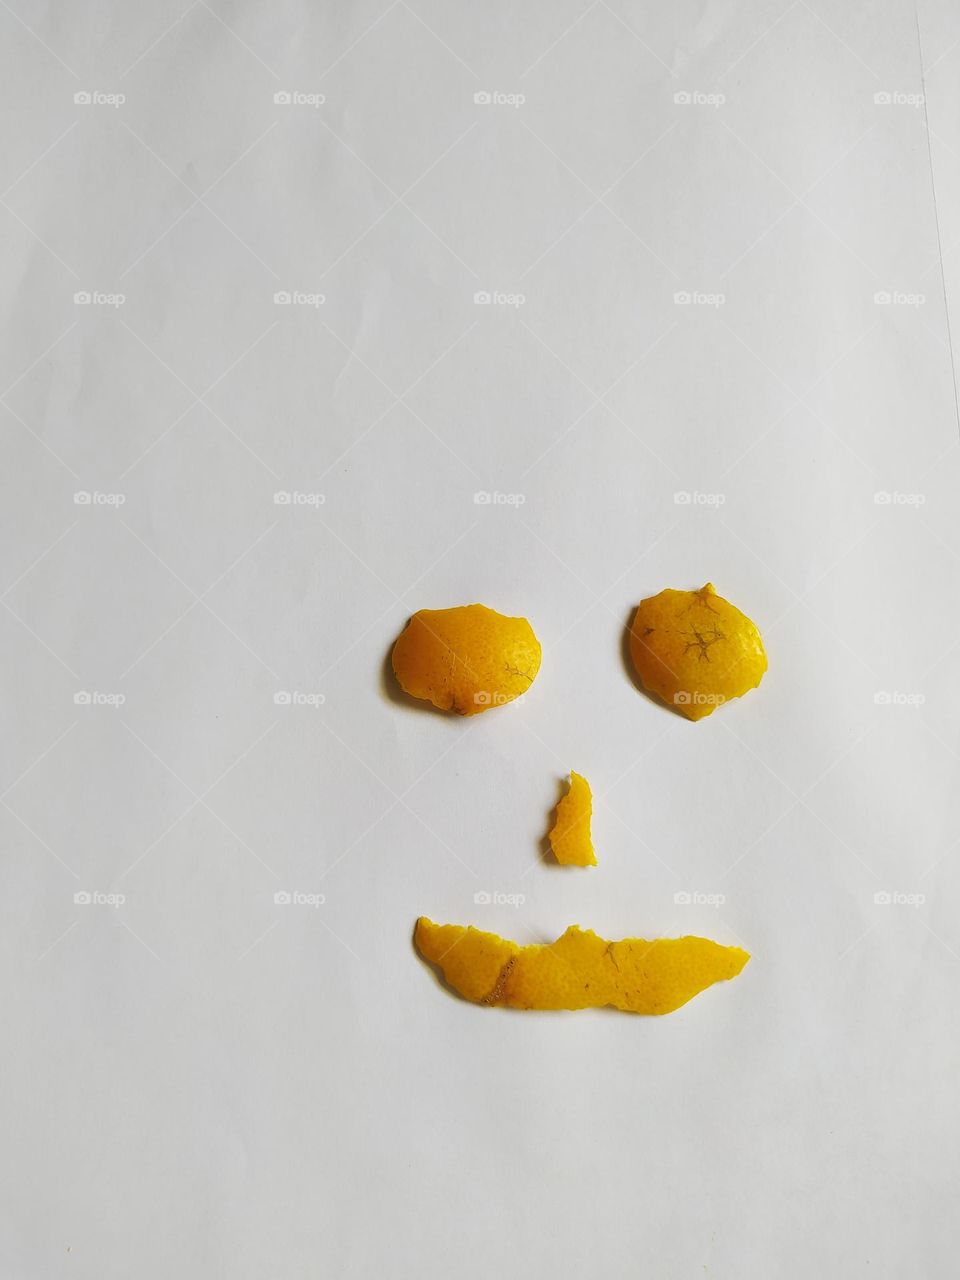 Make yellow orange peel slices into flat facial expressions